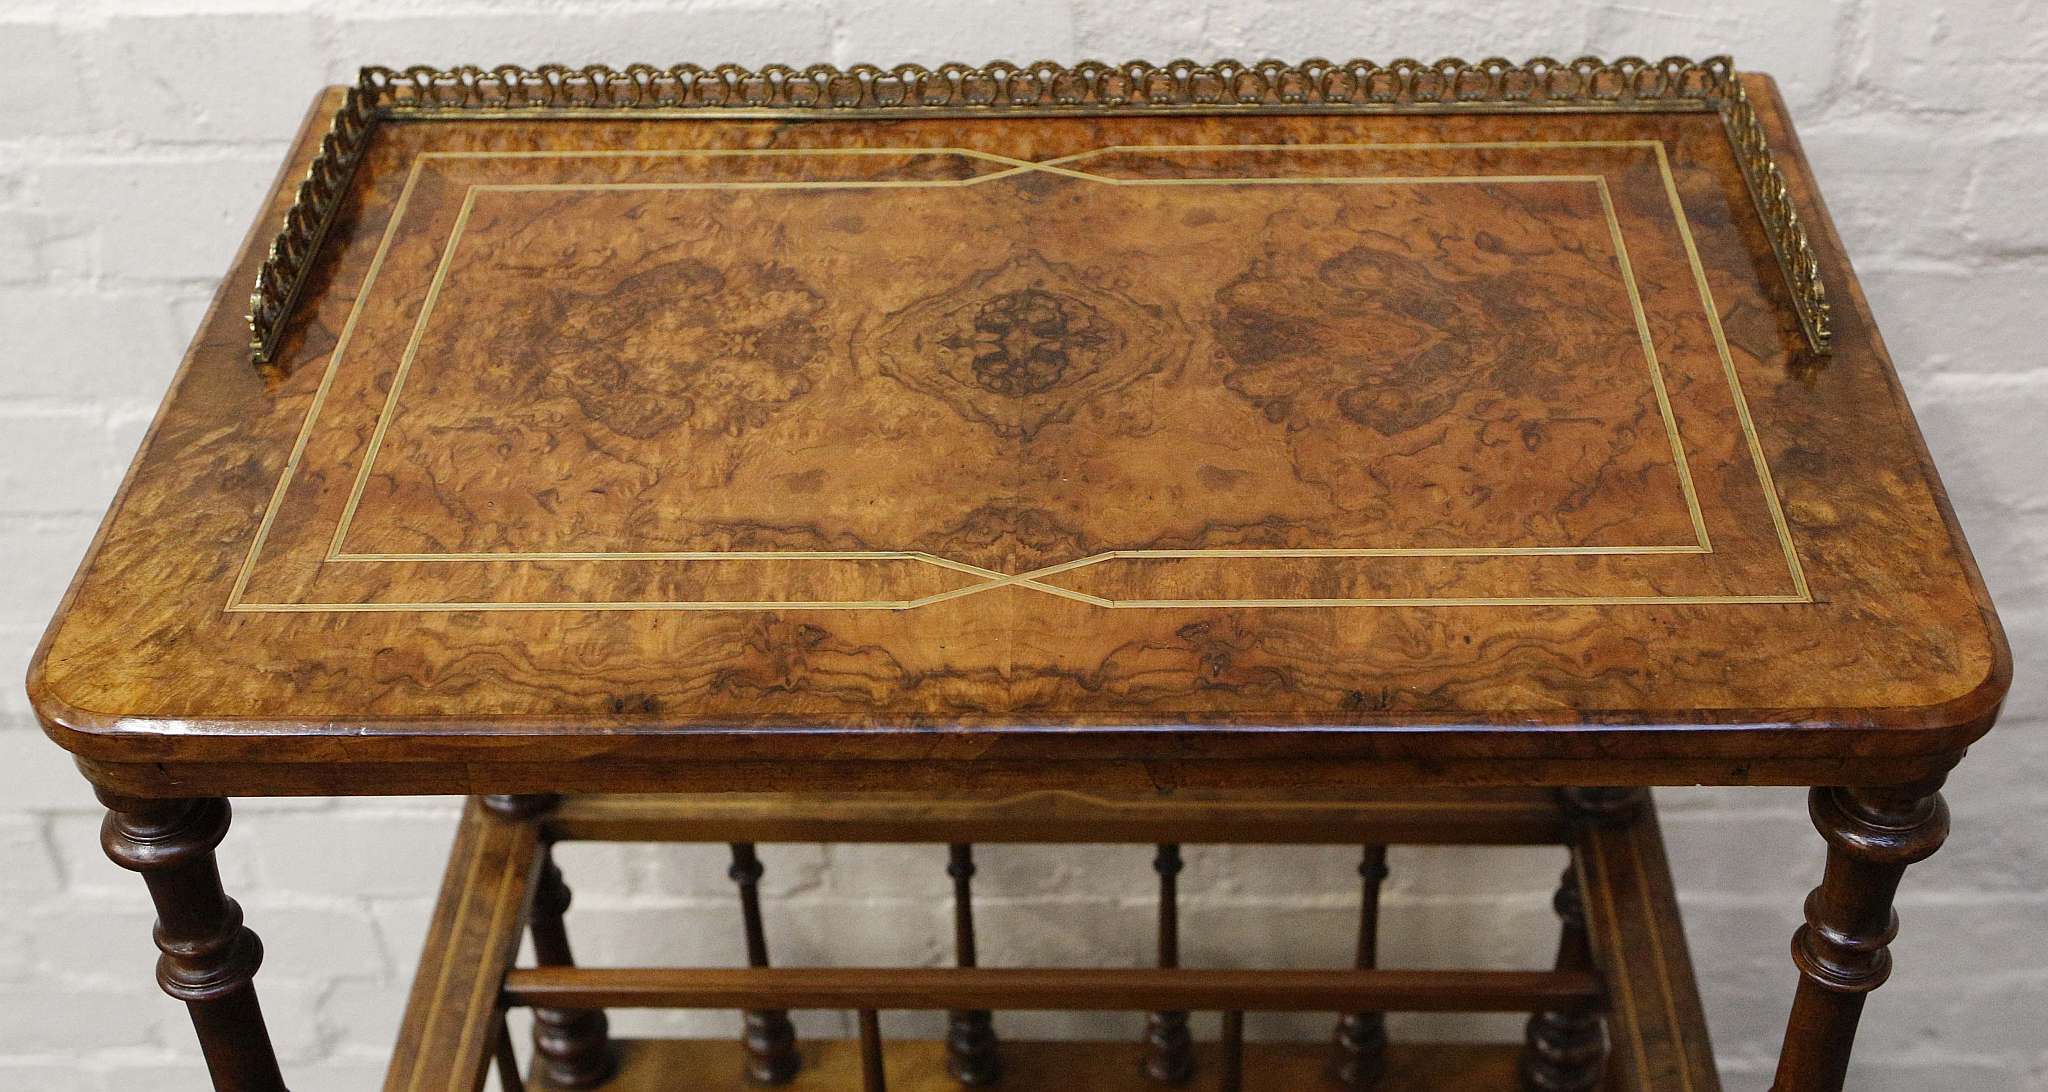 A mid 19th century Canterbury, burr walnut with boxwood inlay, brass gallery, turned supports - Image 2 of 3